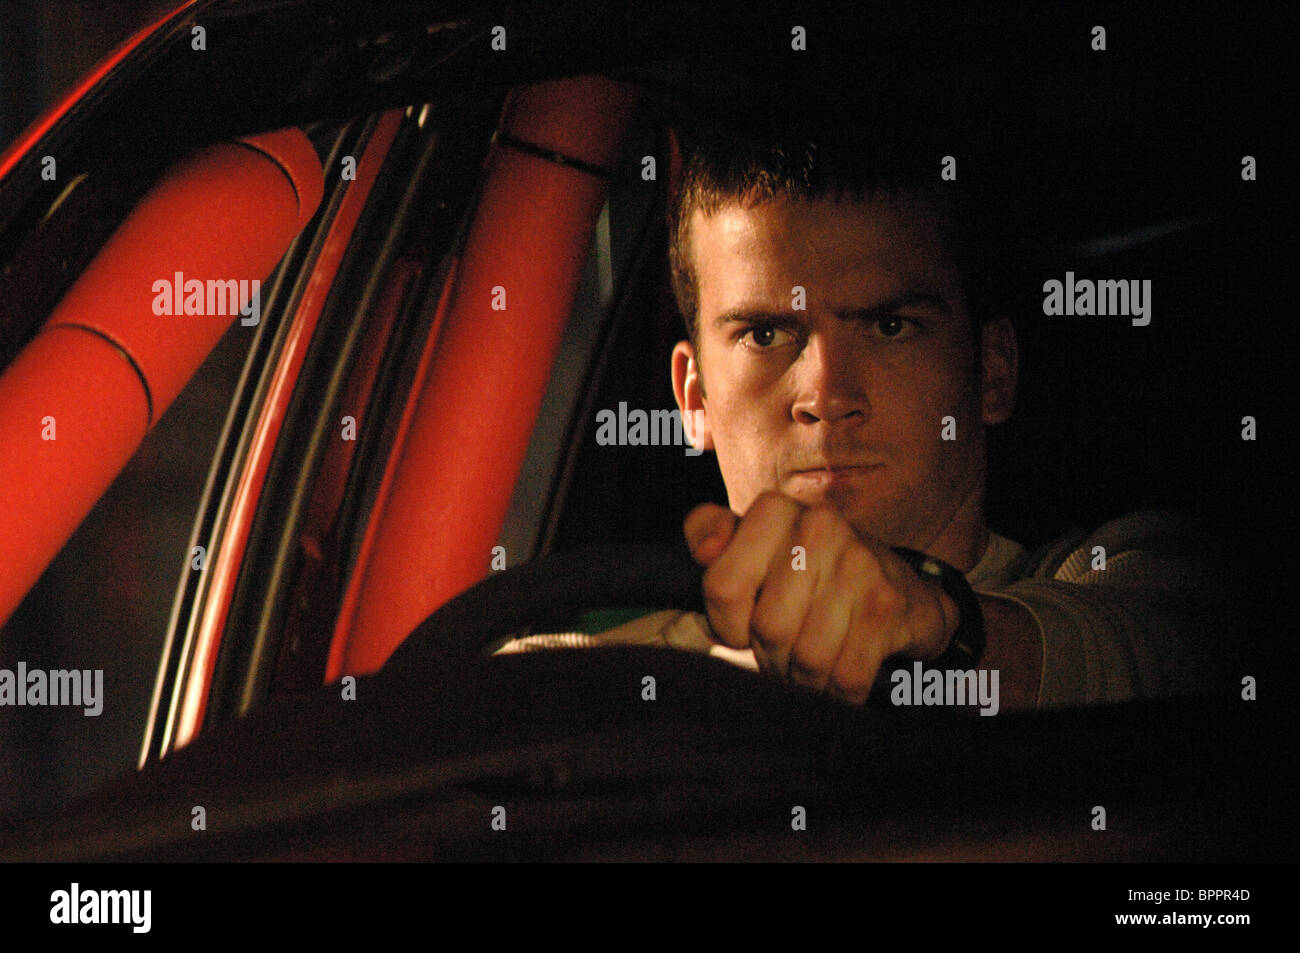 LUCAS BLACK THE FAST AND THE FURIOUS 3; THE FAST AND THE FURIOUS Stock Photo 31233901 Alamy